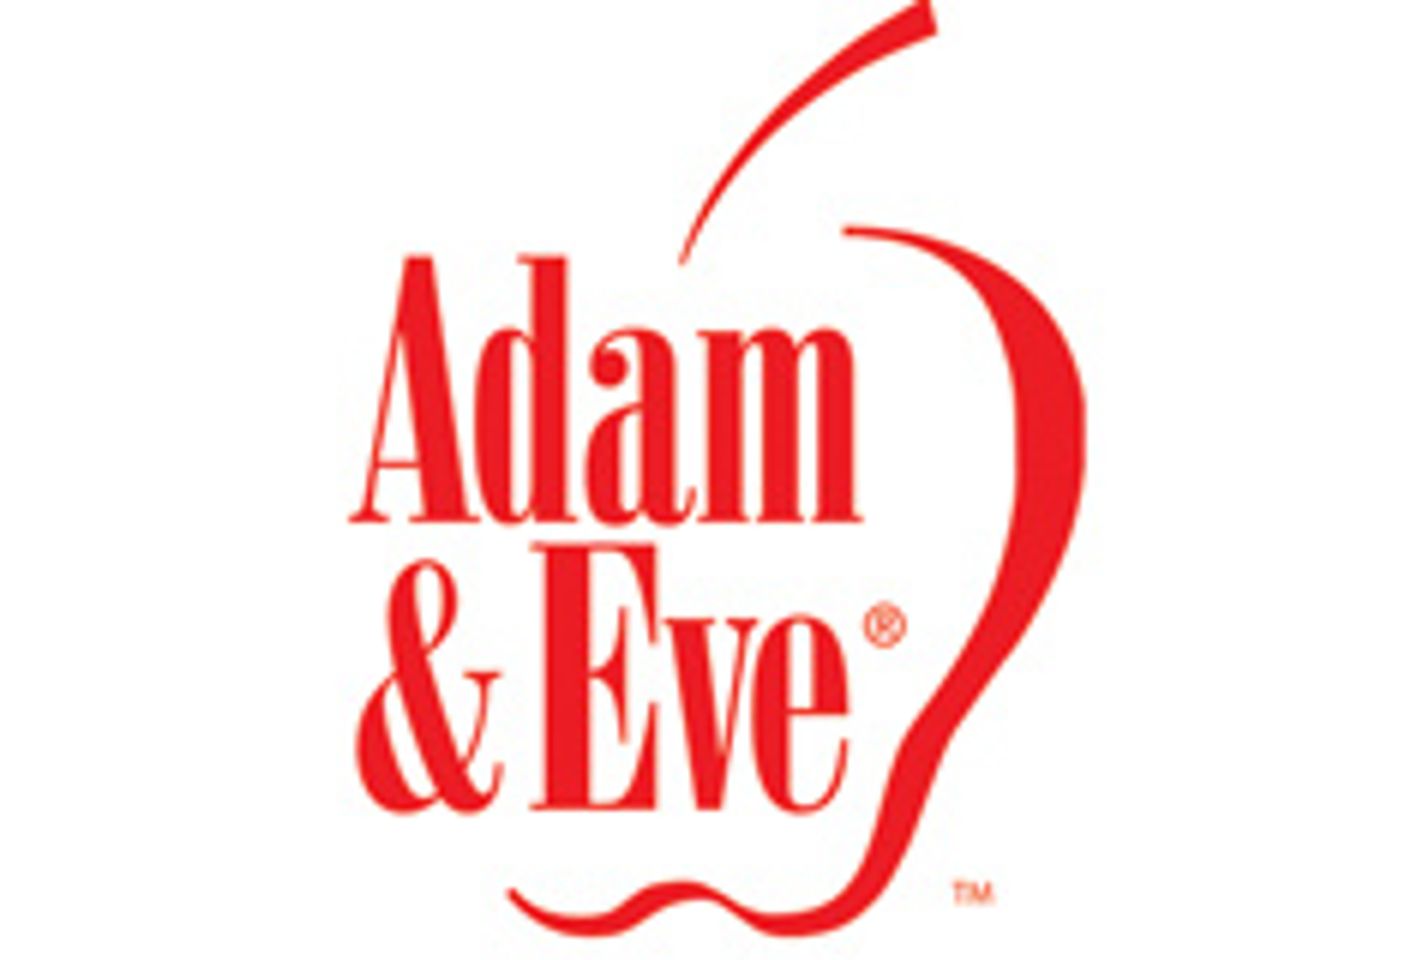 Adam & Eve Finds Success with Podcasts on iTunes